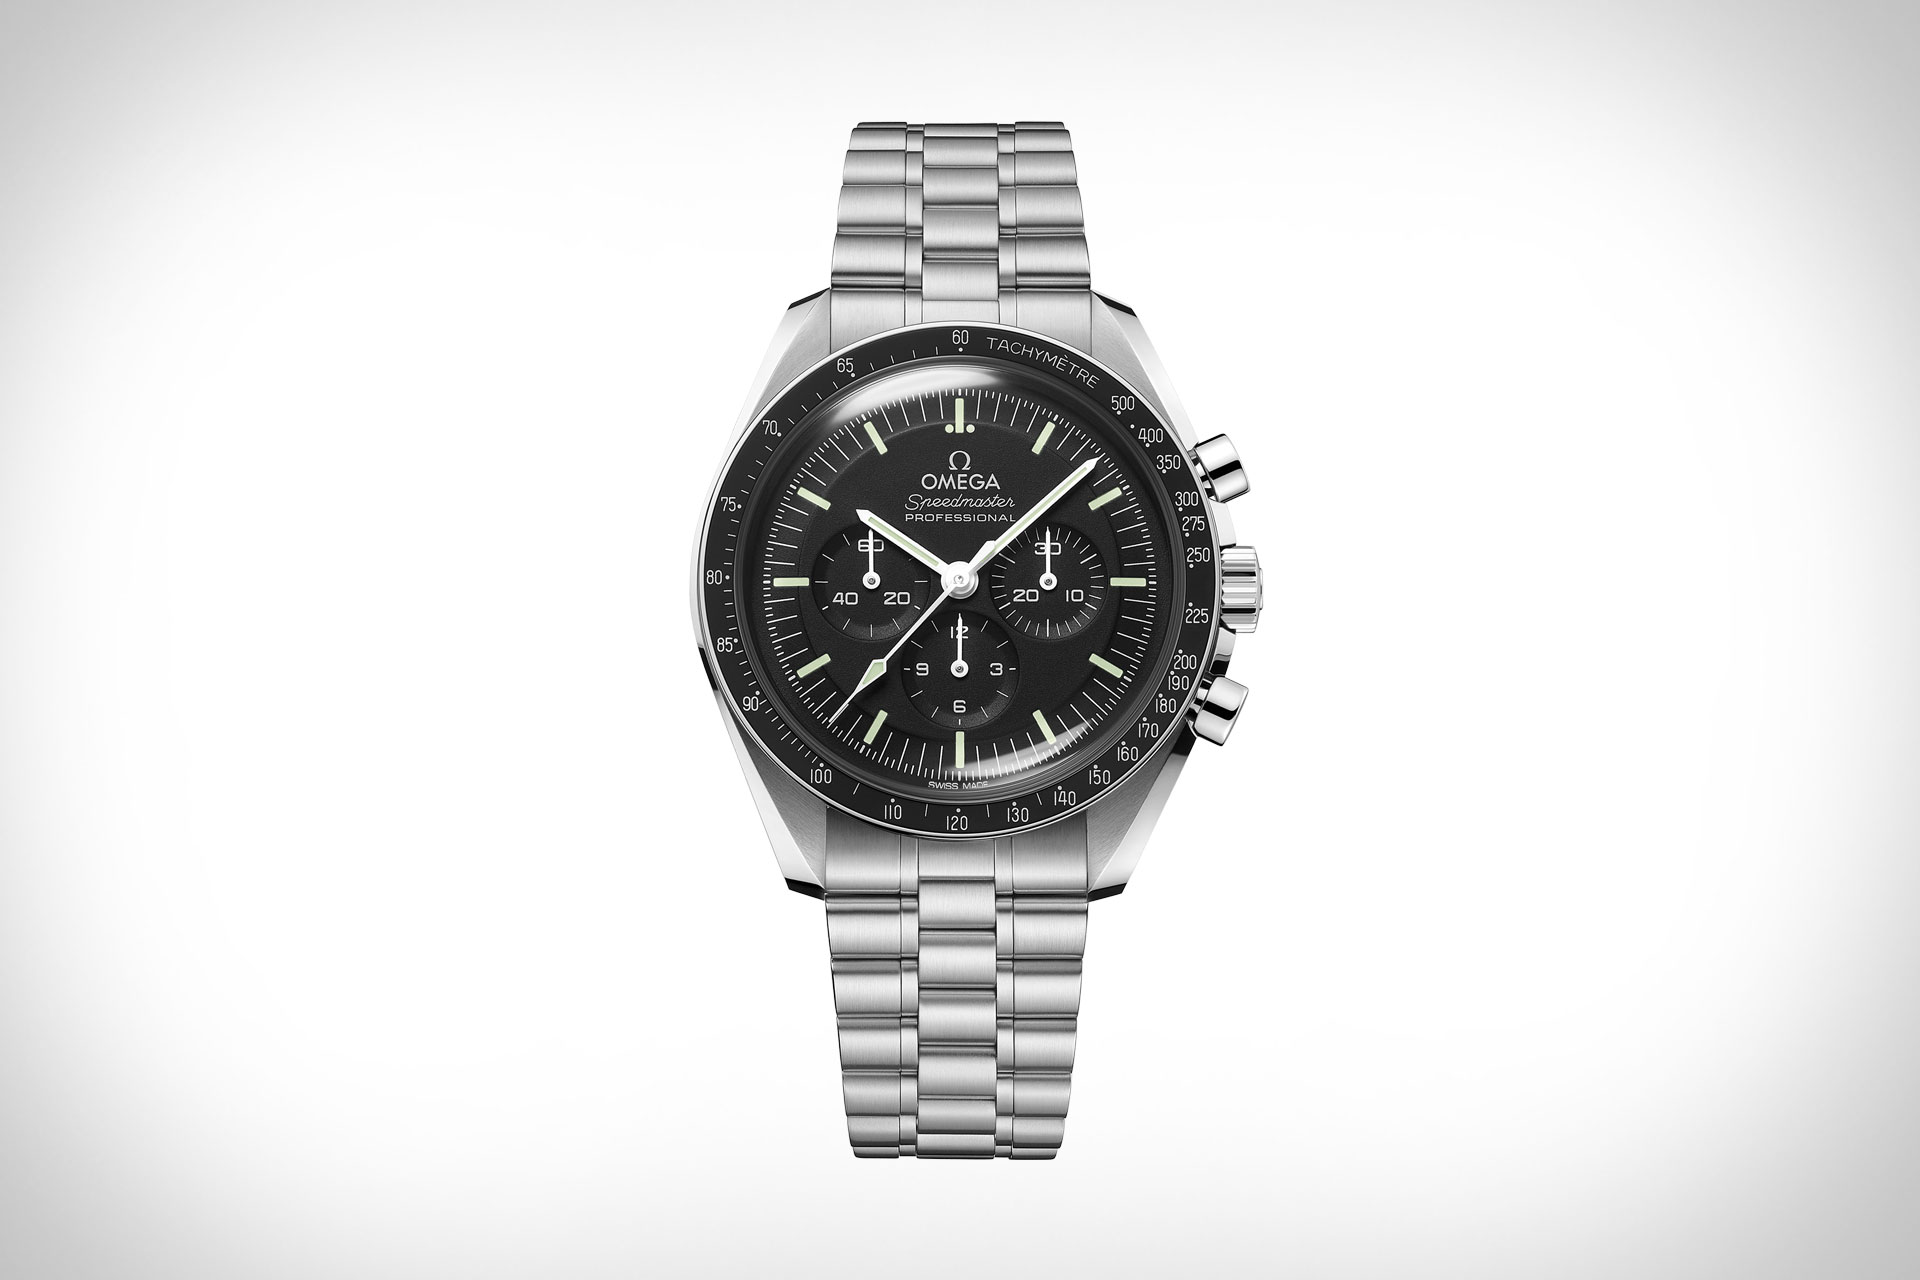 2021 Omega Speedmaster Moonwatch Collection | Uncrate